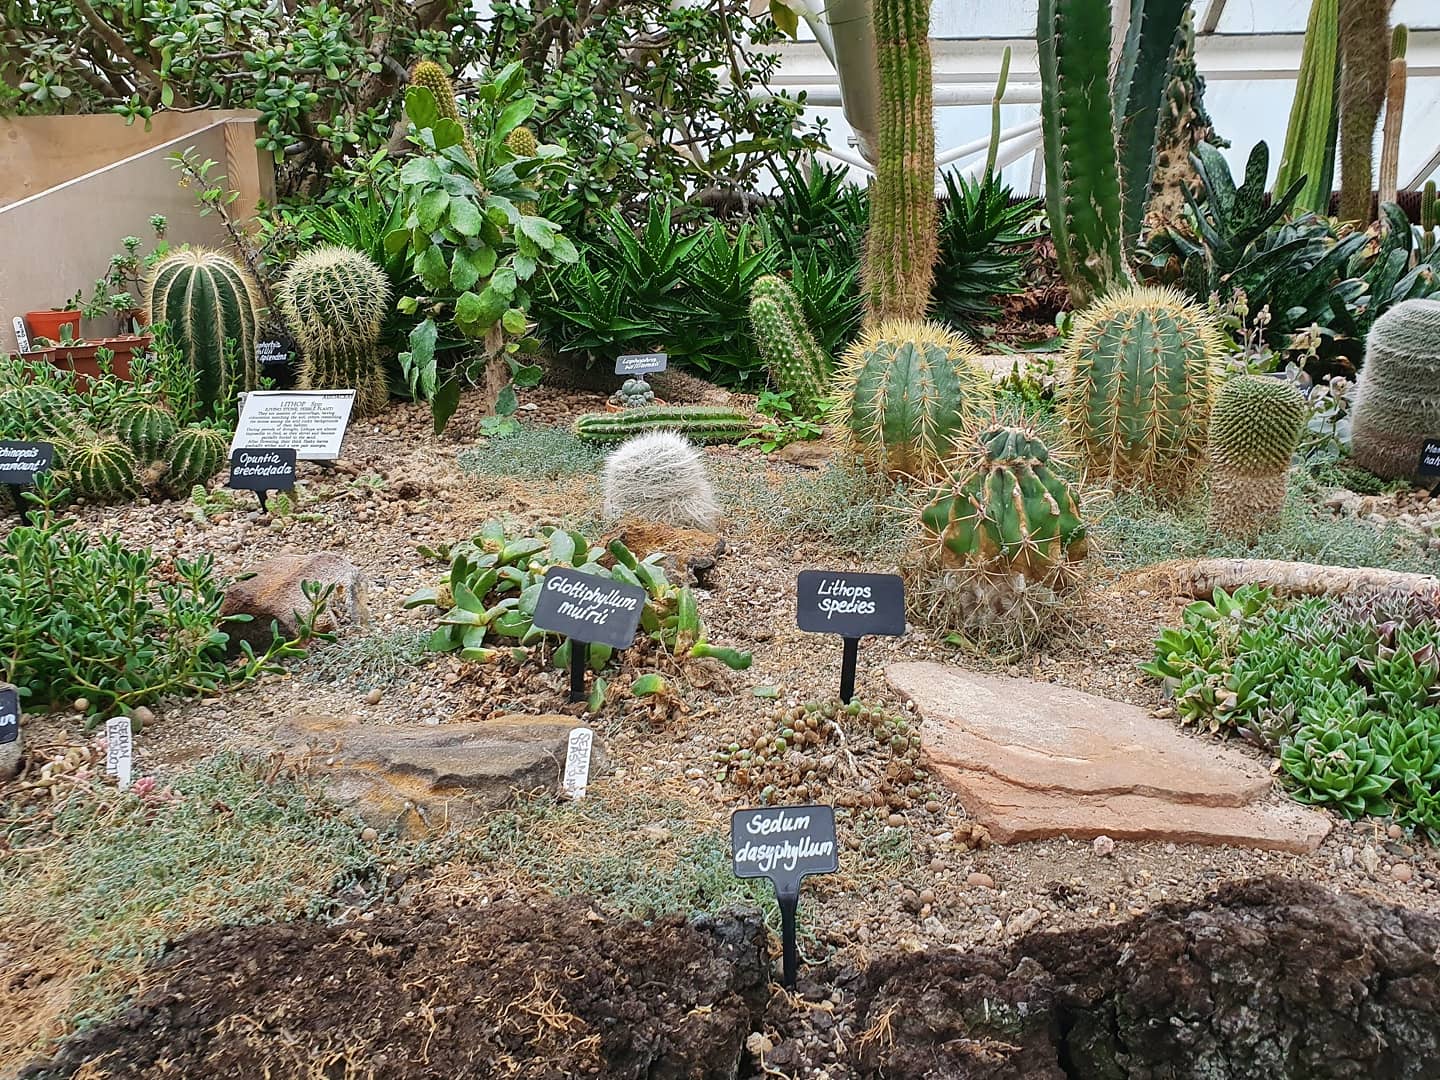 Taking a stroll through Barbican Conservatory - cacti